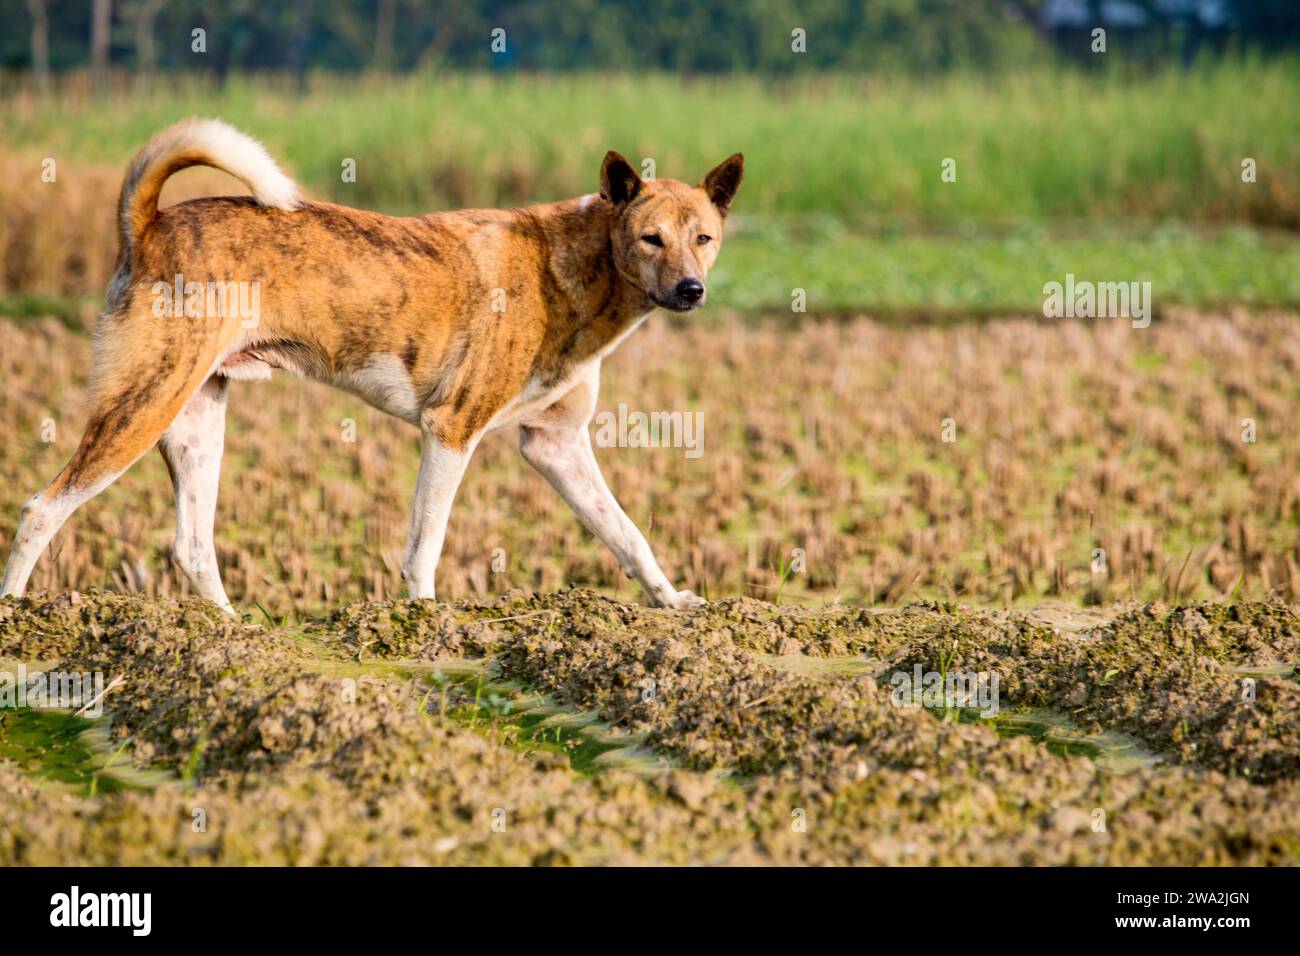 Dog is runing in natural environment. Stock Photo